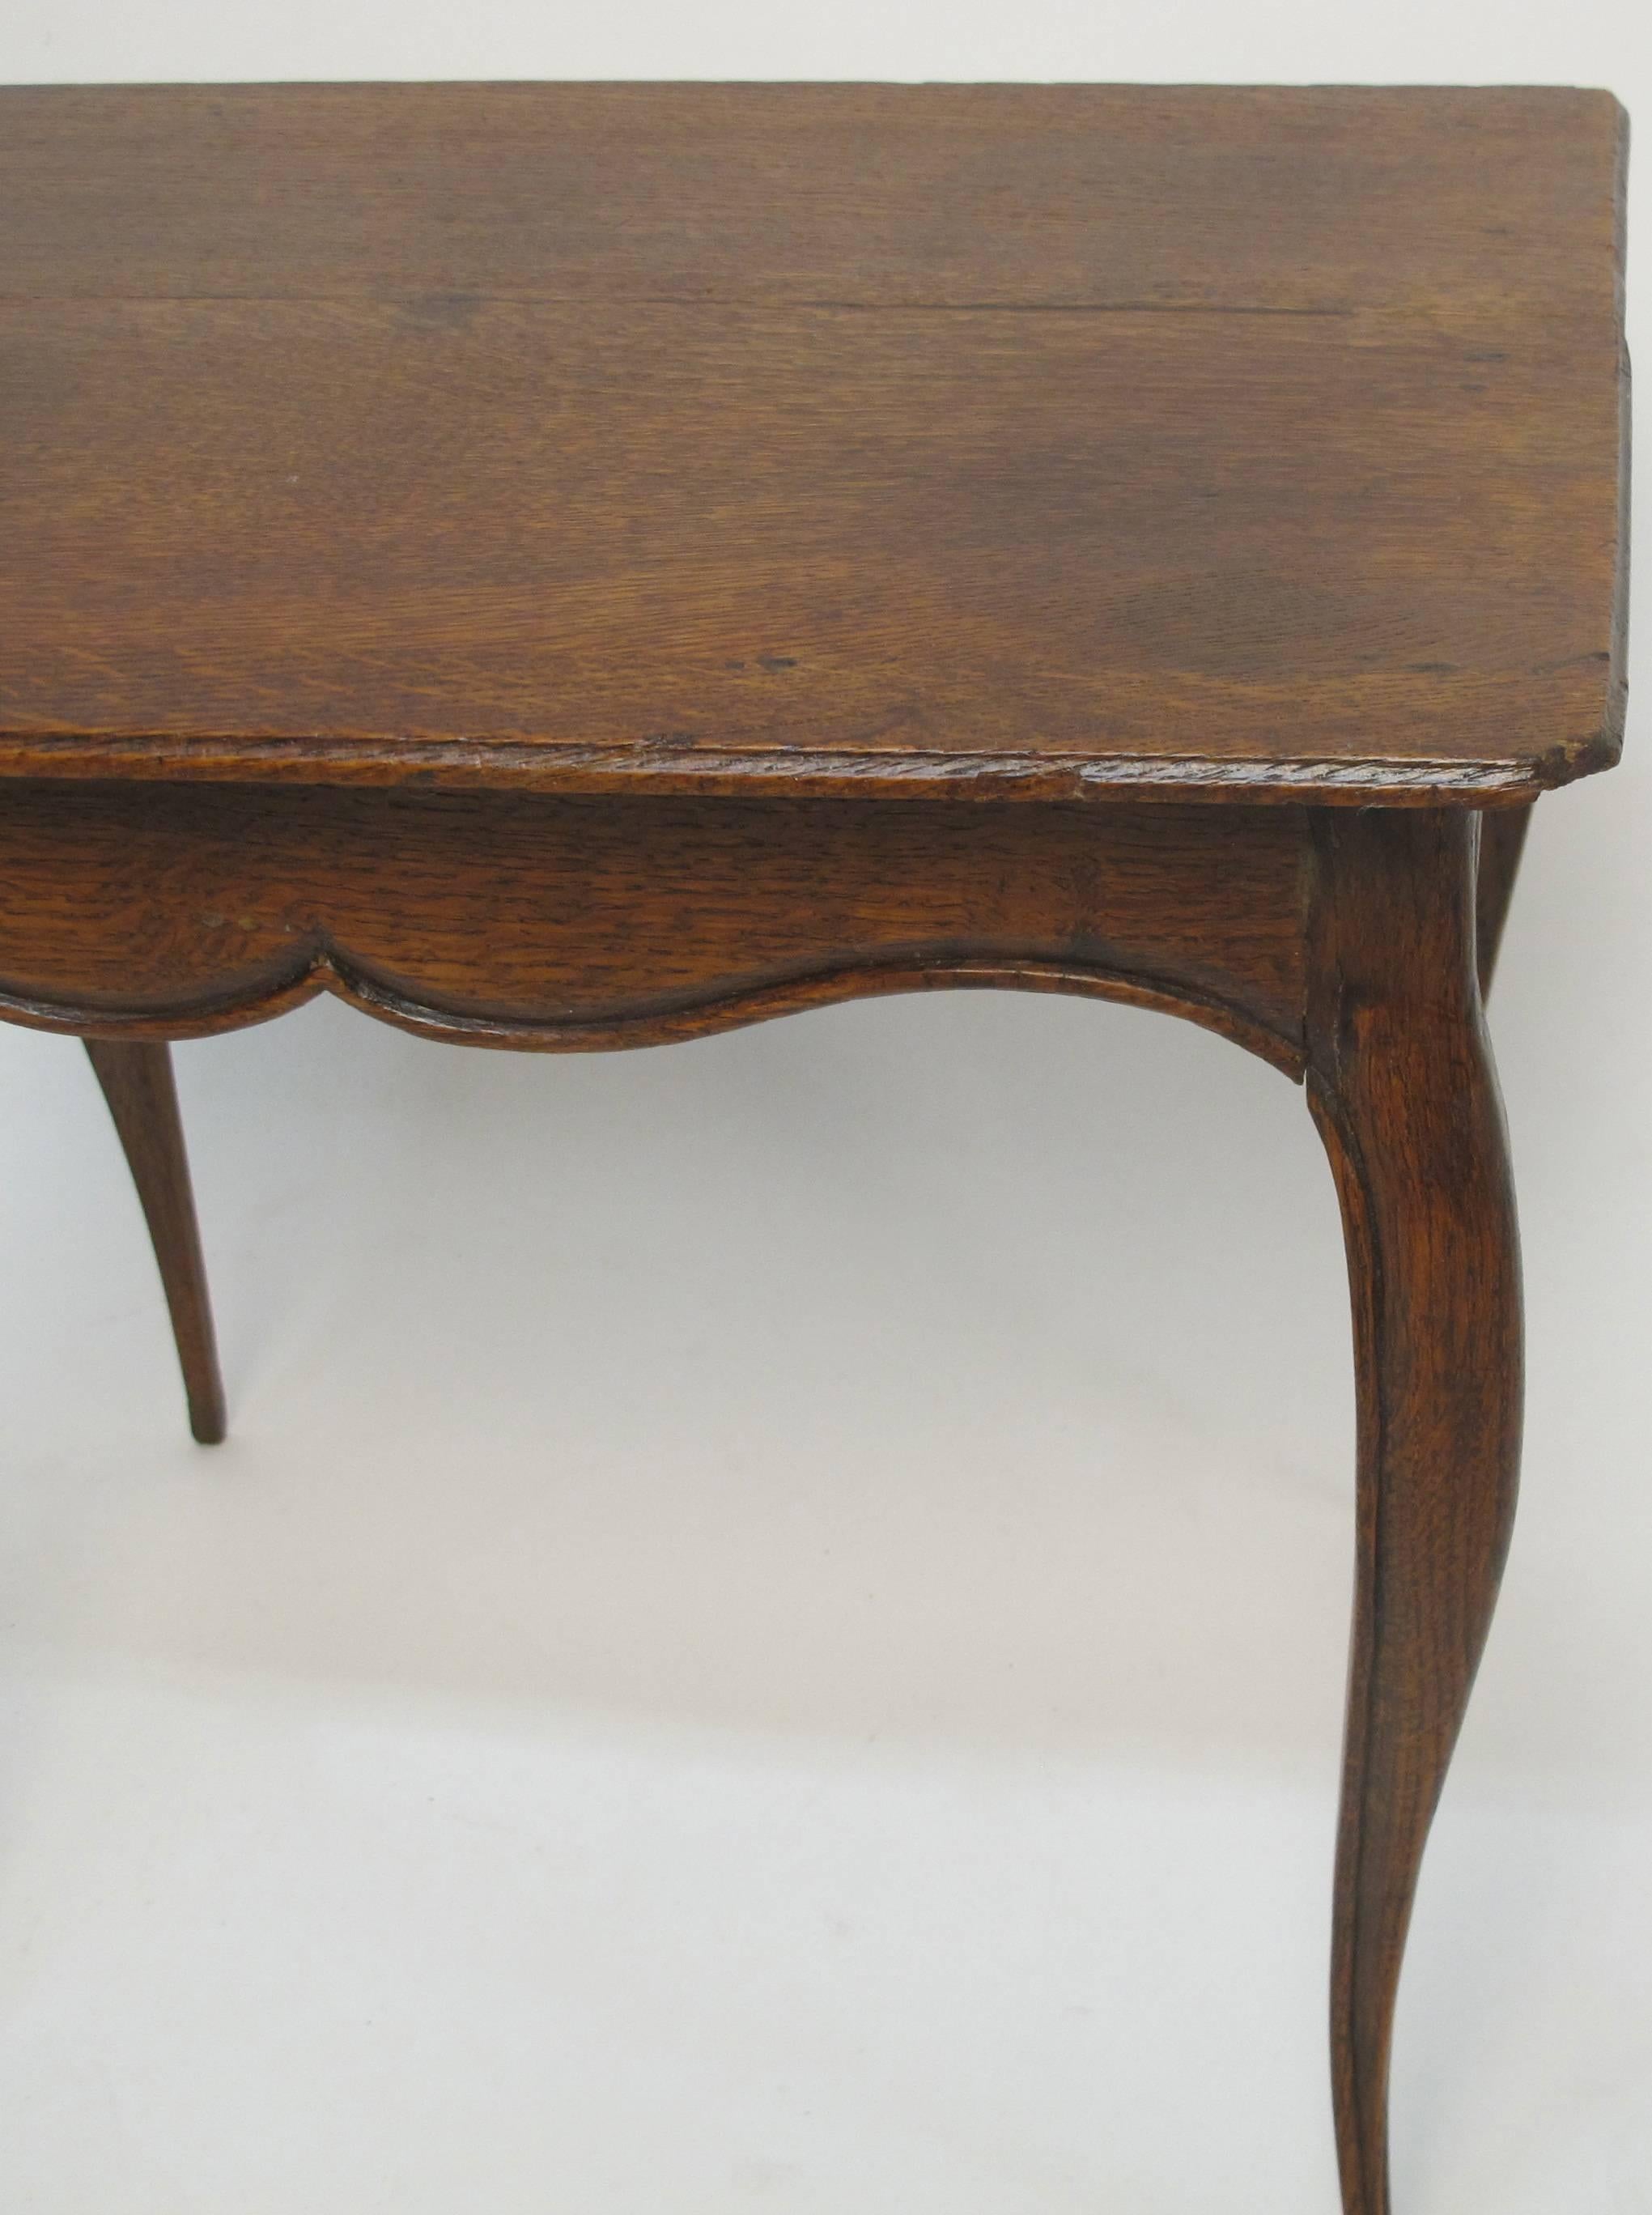 Oak Childs Table with Single Drawer, French, 19th Century 2